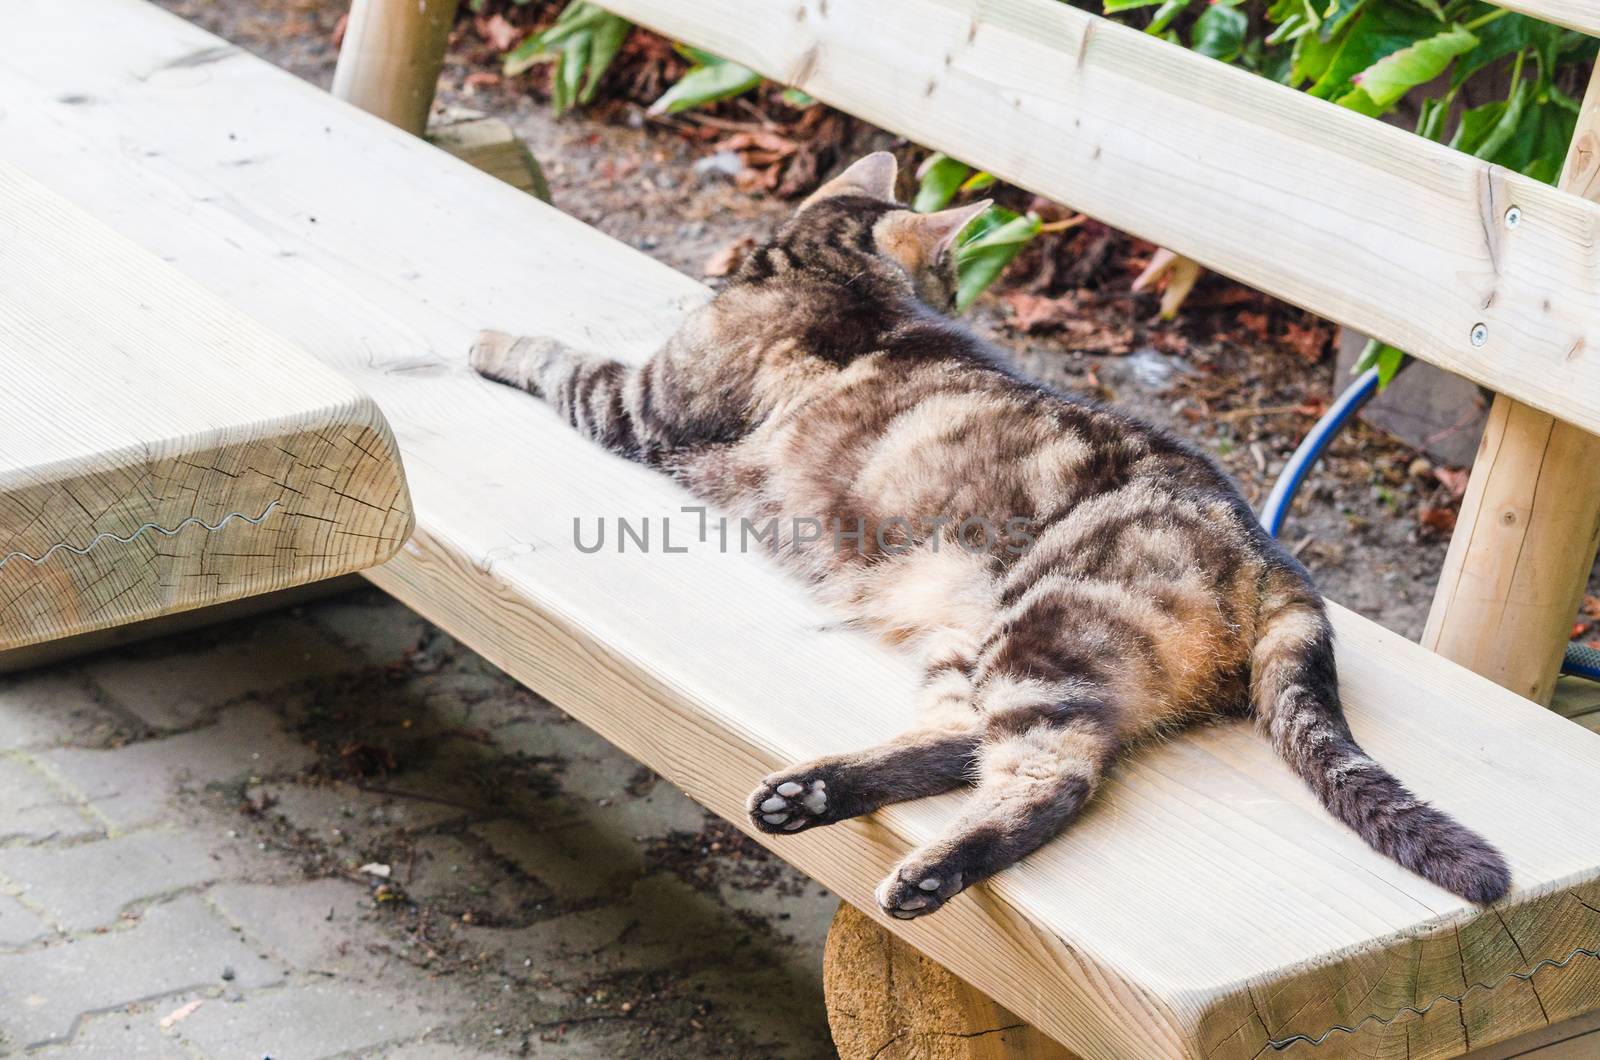 Lazy cat sleeping on a wooden bench.